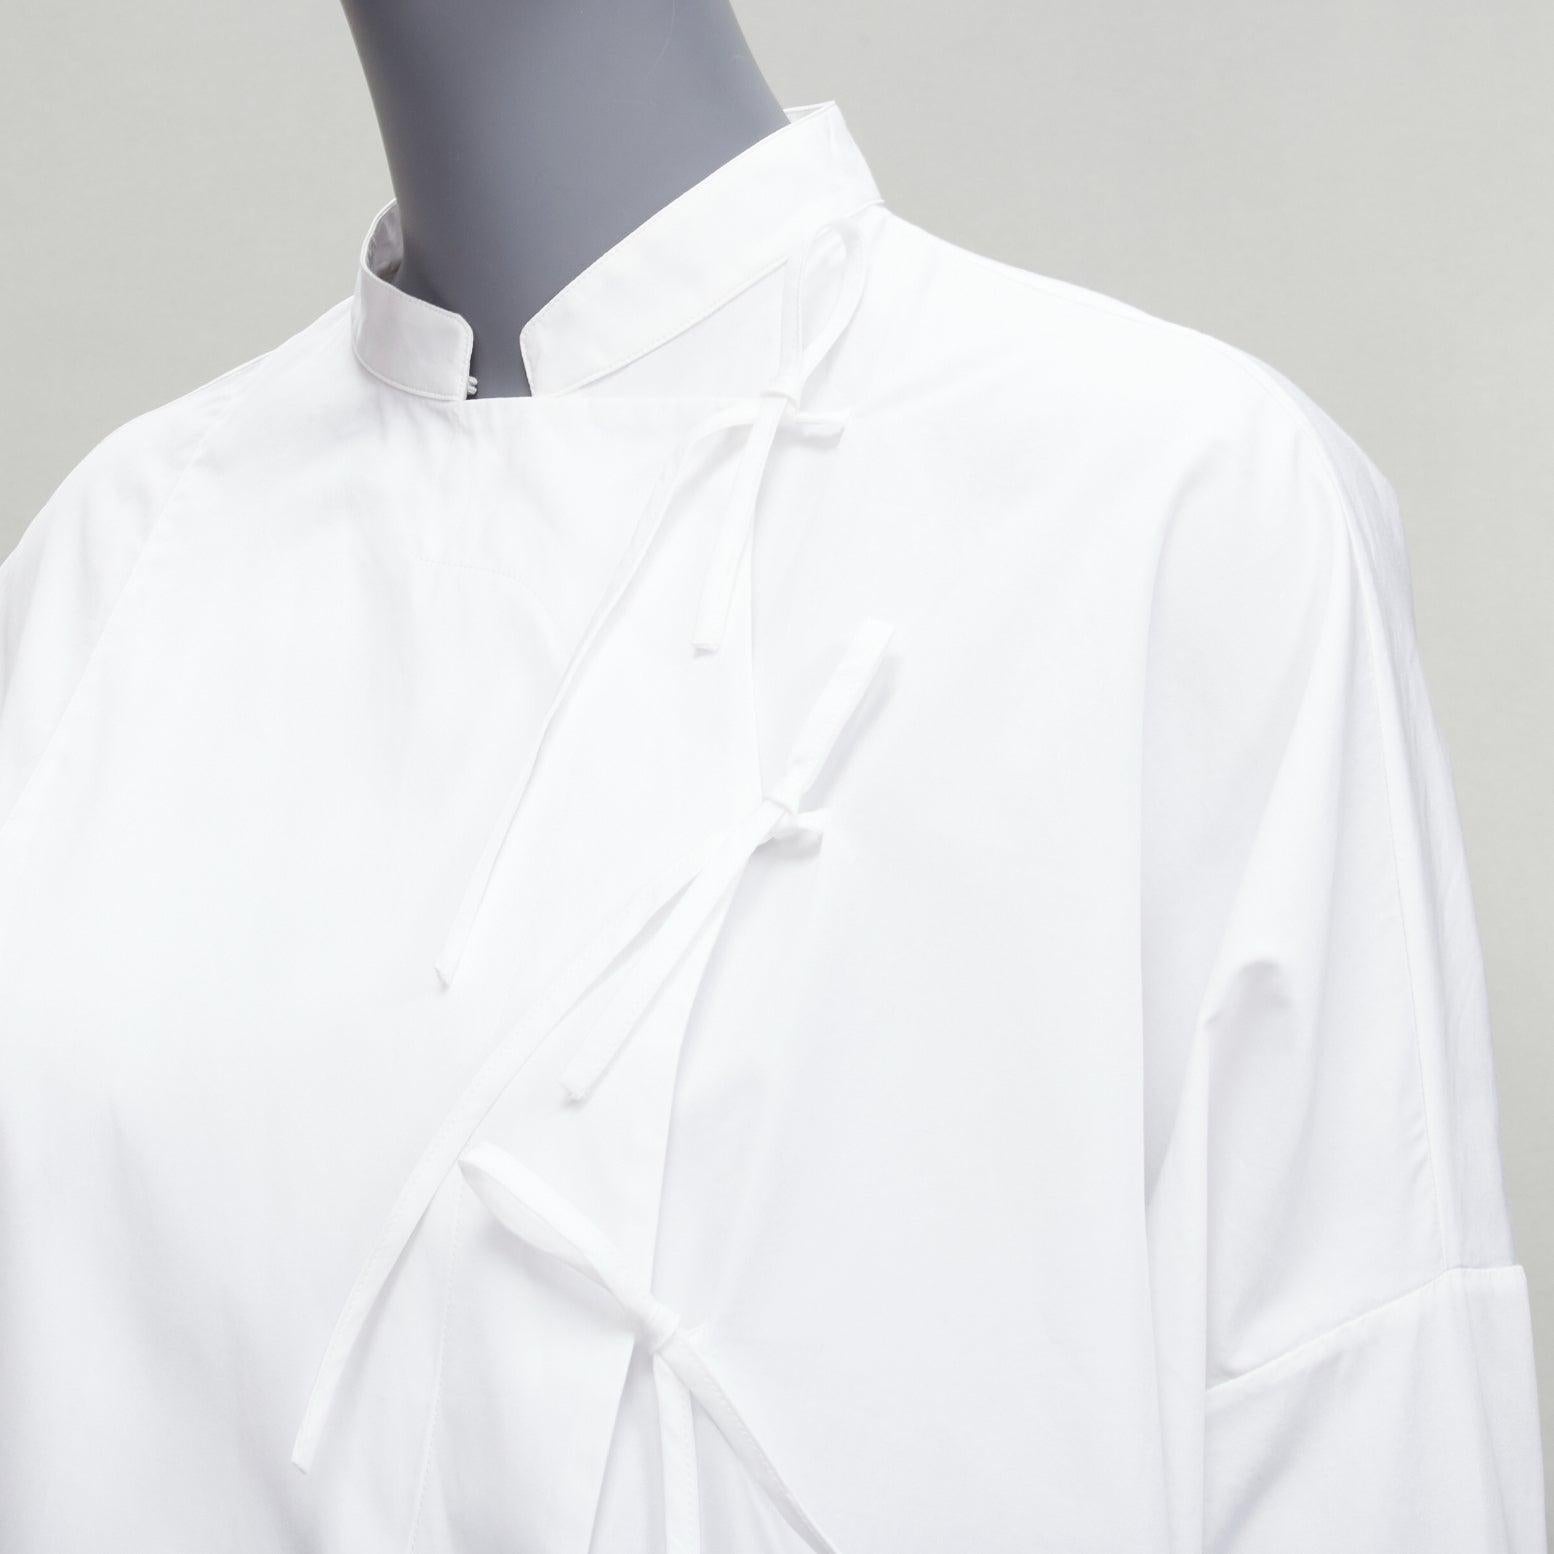 JIL SANDER 2018 white cotton tie button panelled tunic shirt dress FR32 XXS
Reference: LNKO/A02163
Brand: Jil Sander
Collection: 2018
Material: Cotton
Color: White
Pattern: Solid
Closure: Self Tie
Made in: Italy

CONDITION:
Condition: Excellent,